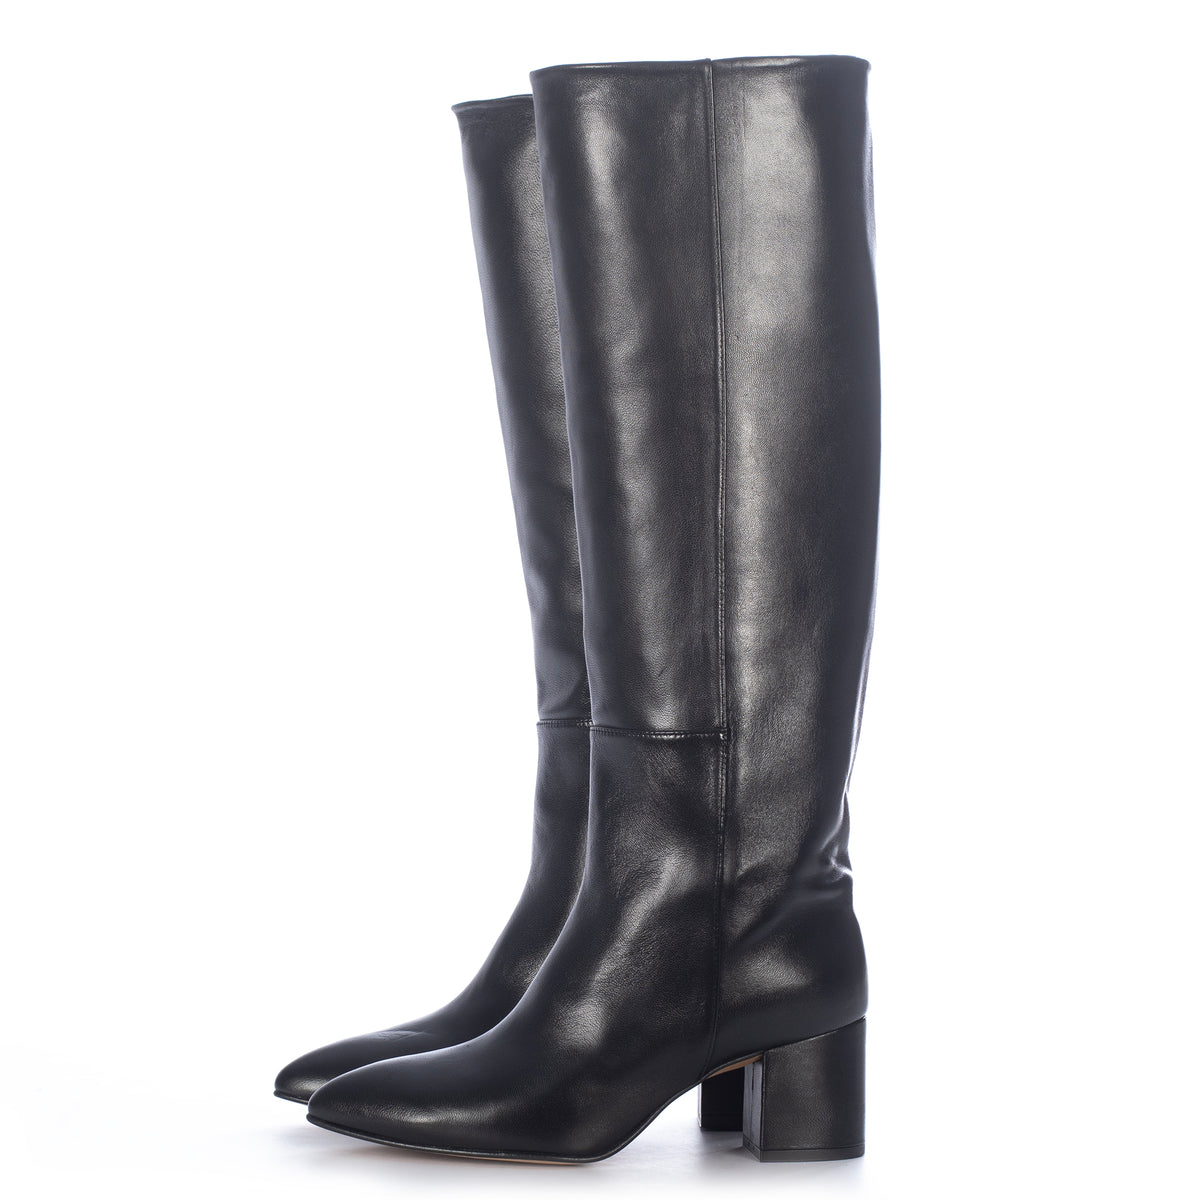 BLACK LEATHER TALL BOOTS – Toral